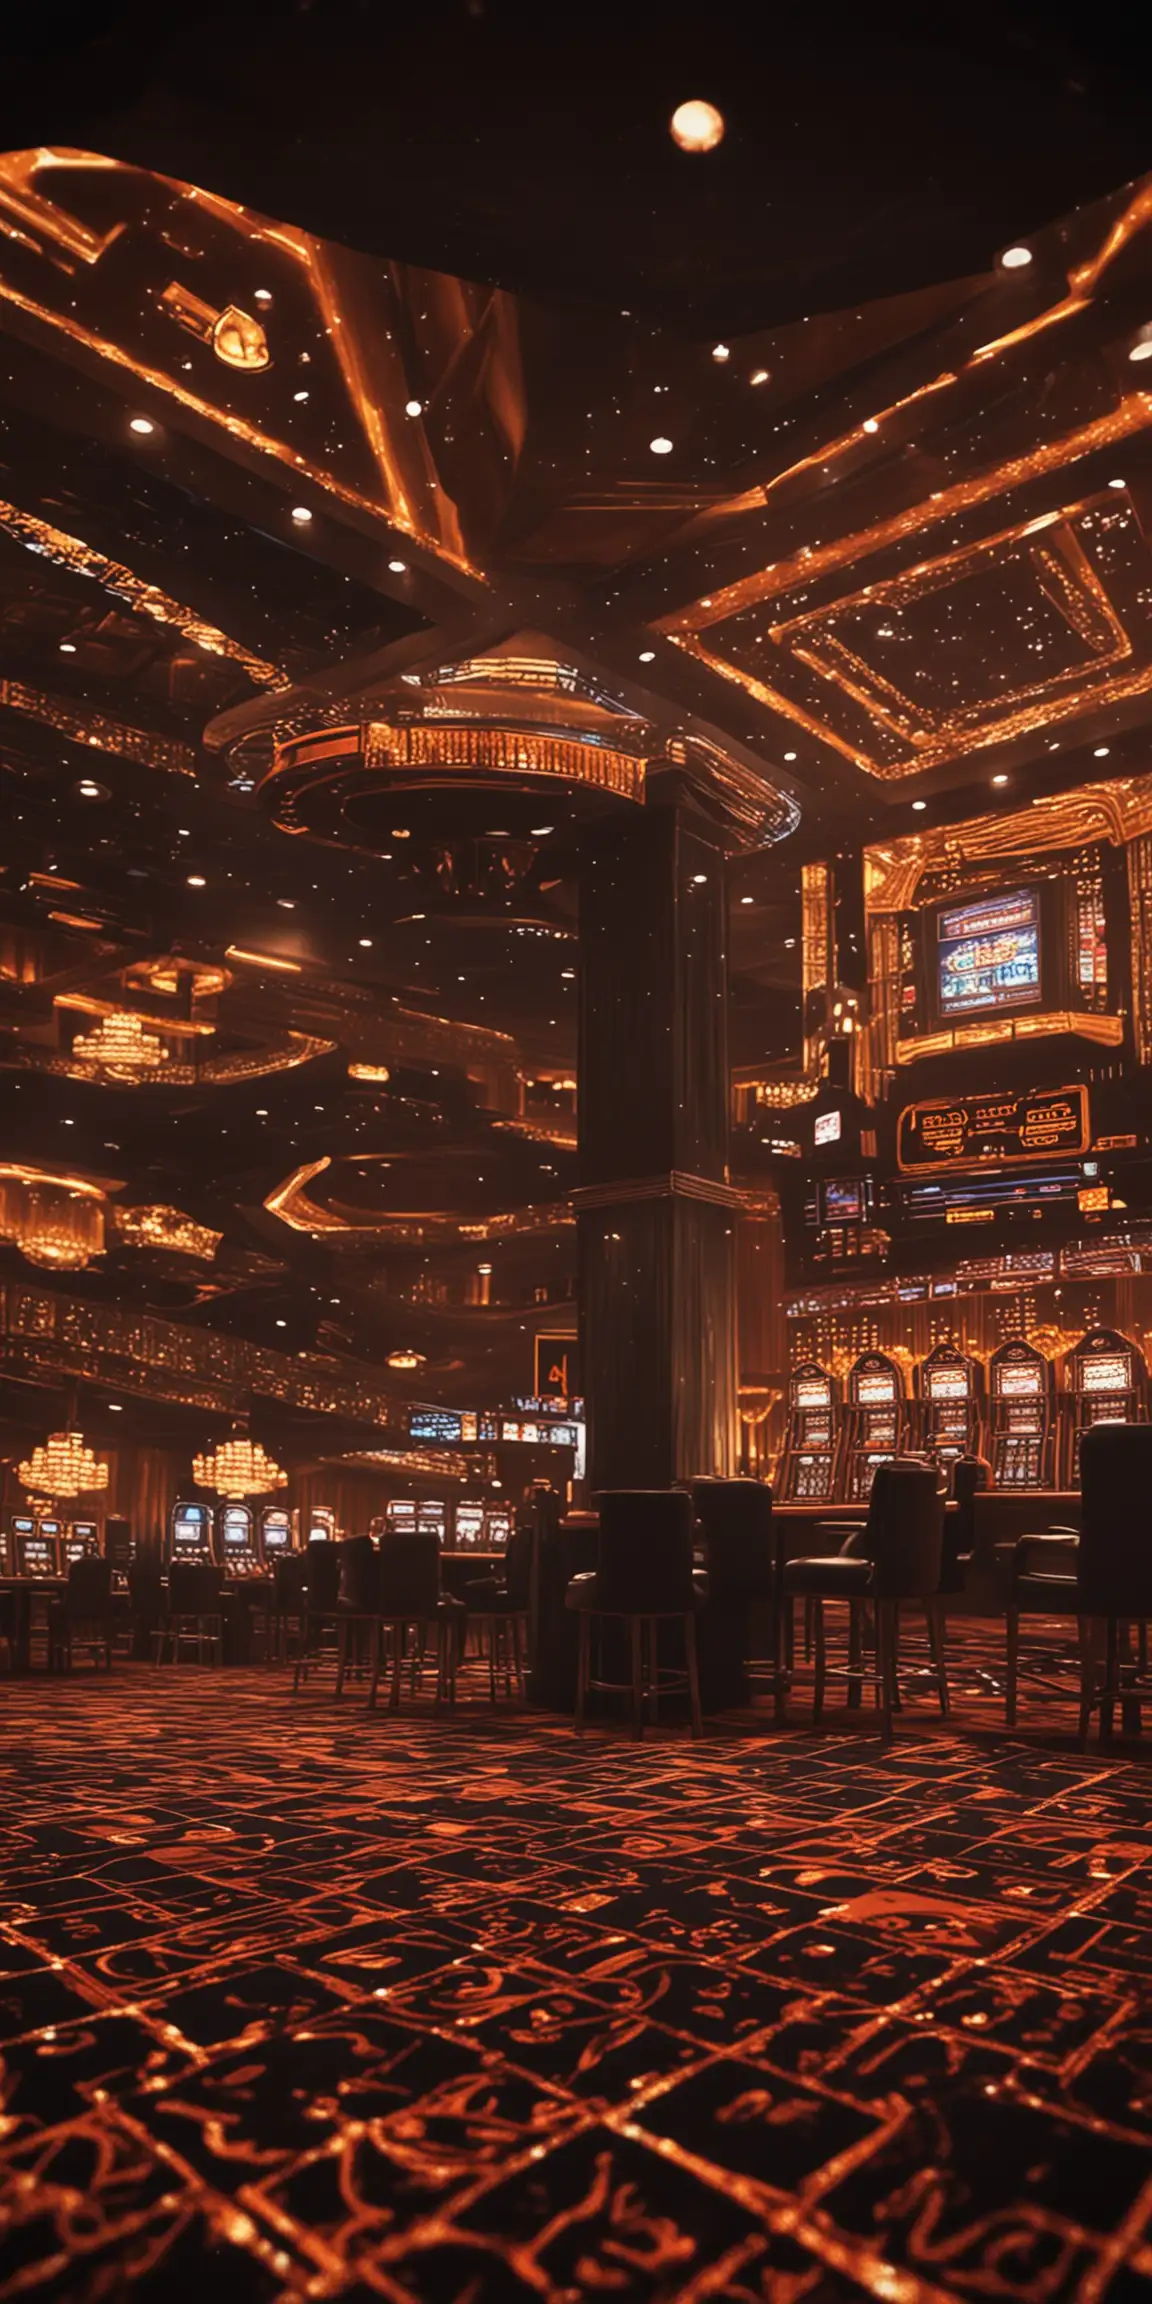 Vibrant Casino Ambience in Orange and Black Realistic 4K HD Effects